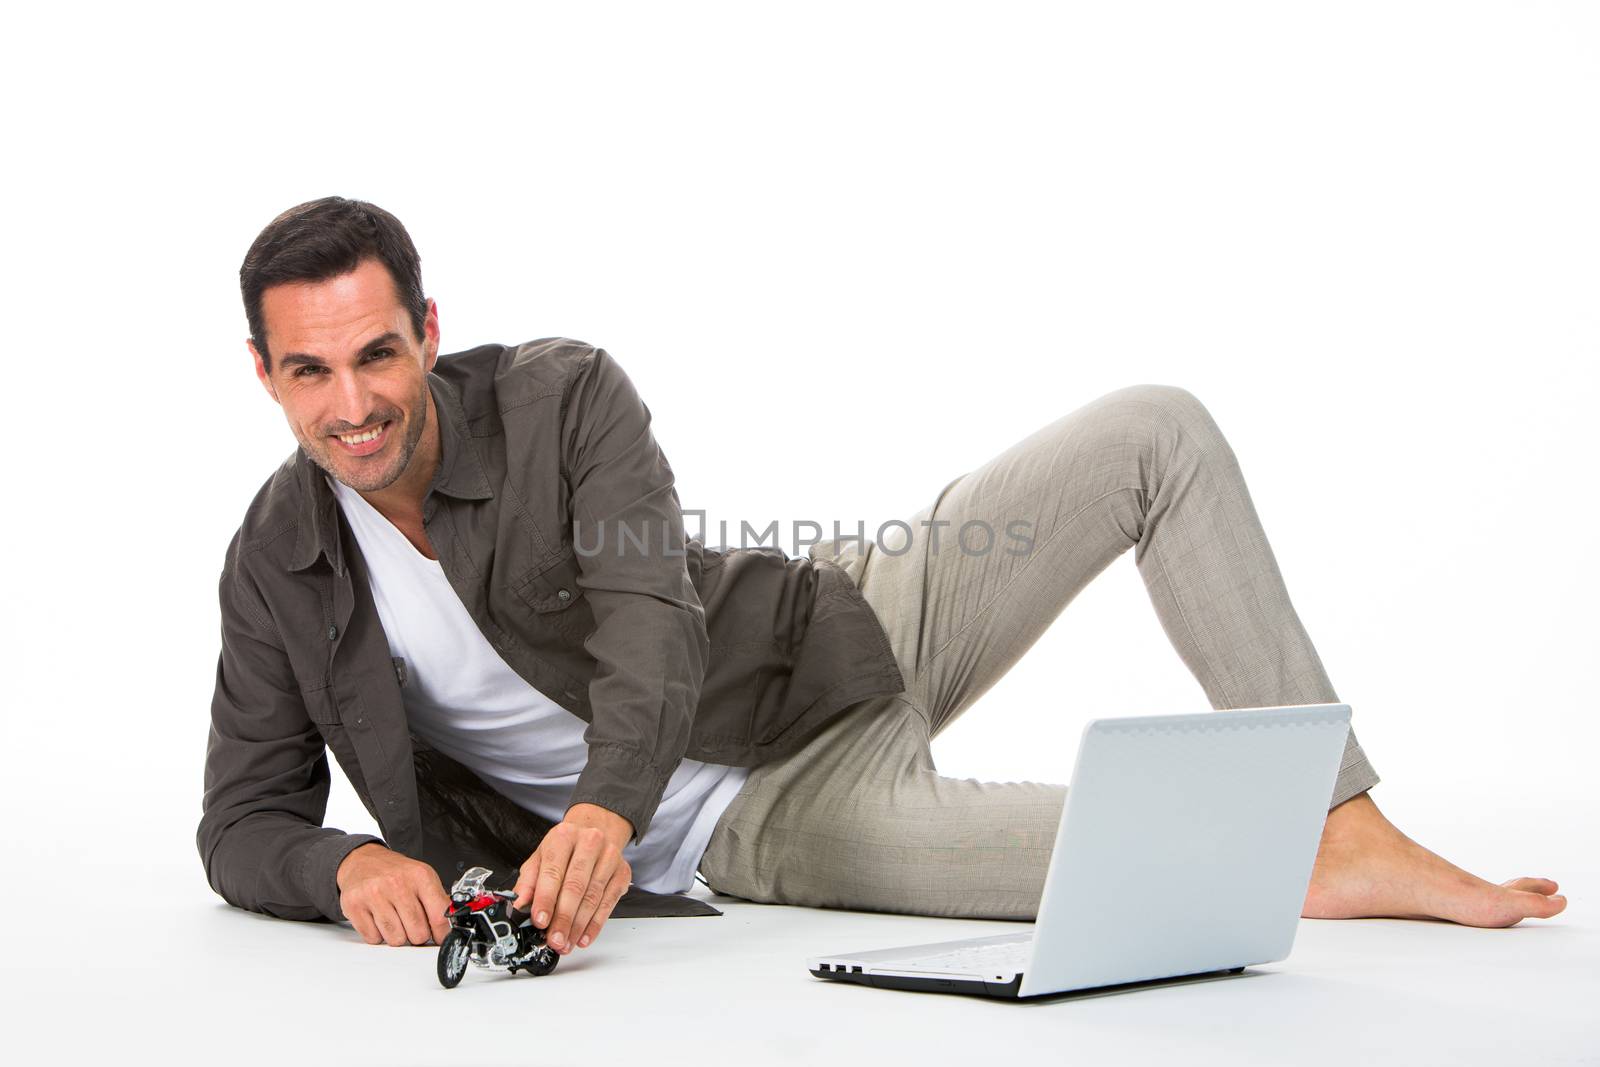 Man laying on the floor, smiling at camera playing with a motorbike scale model and laptop next to him